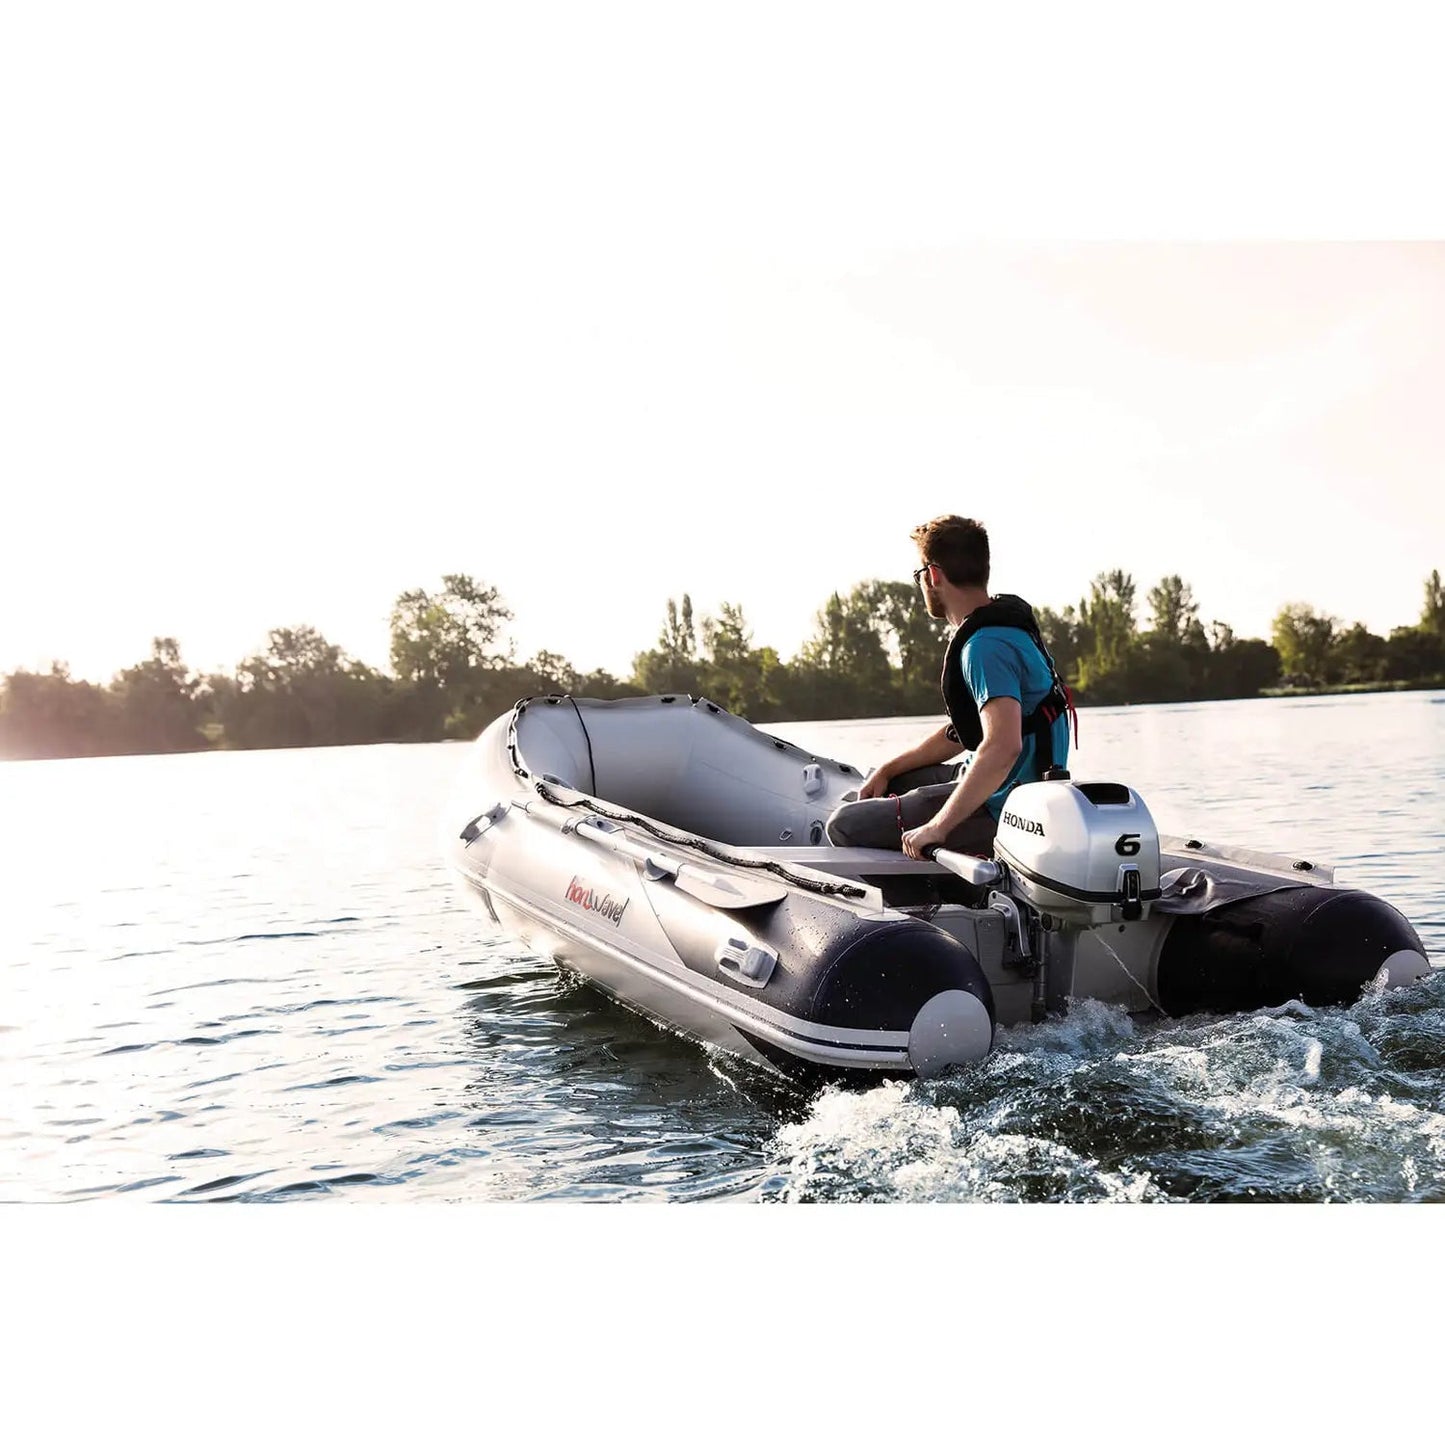 Honwave Package T30AE3 3.0m Inflatable Boat Dinghy Aluminium Floor & Honda Bf15 15hp Outboard Engine